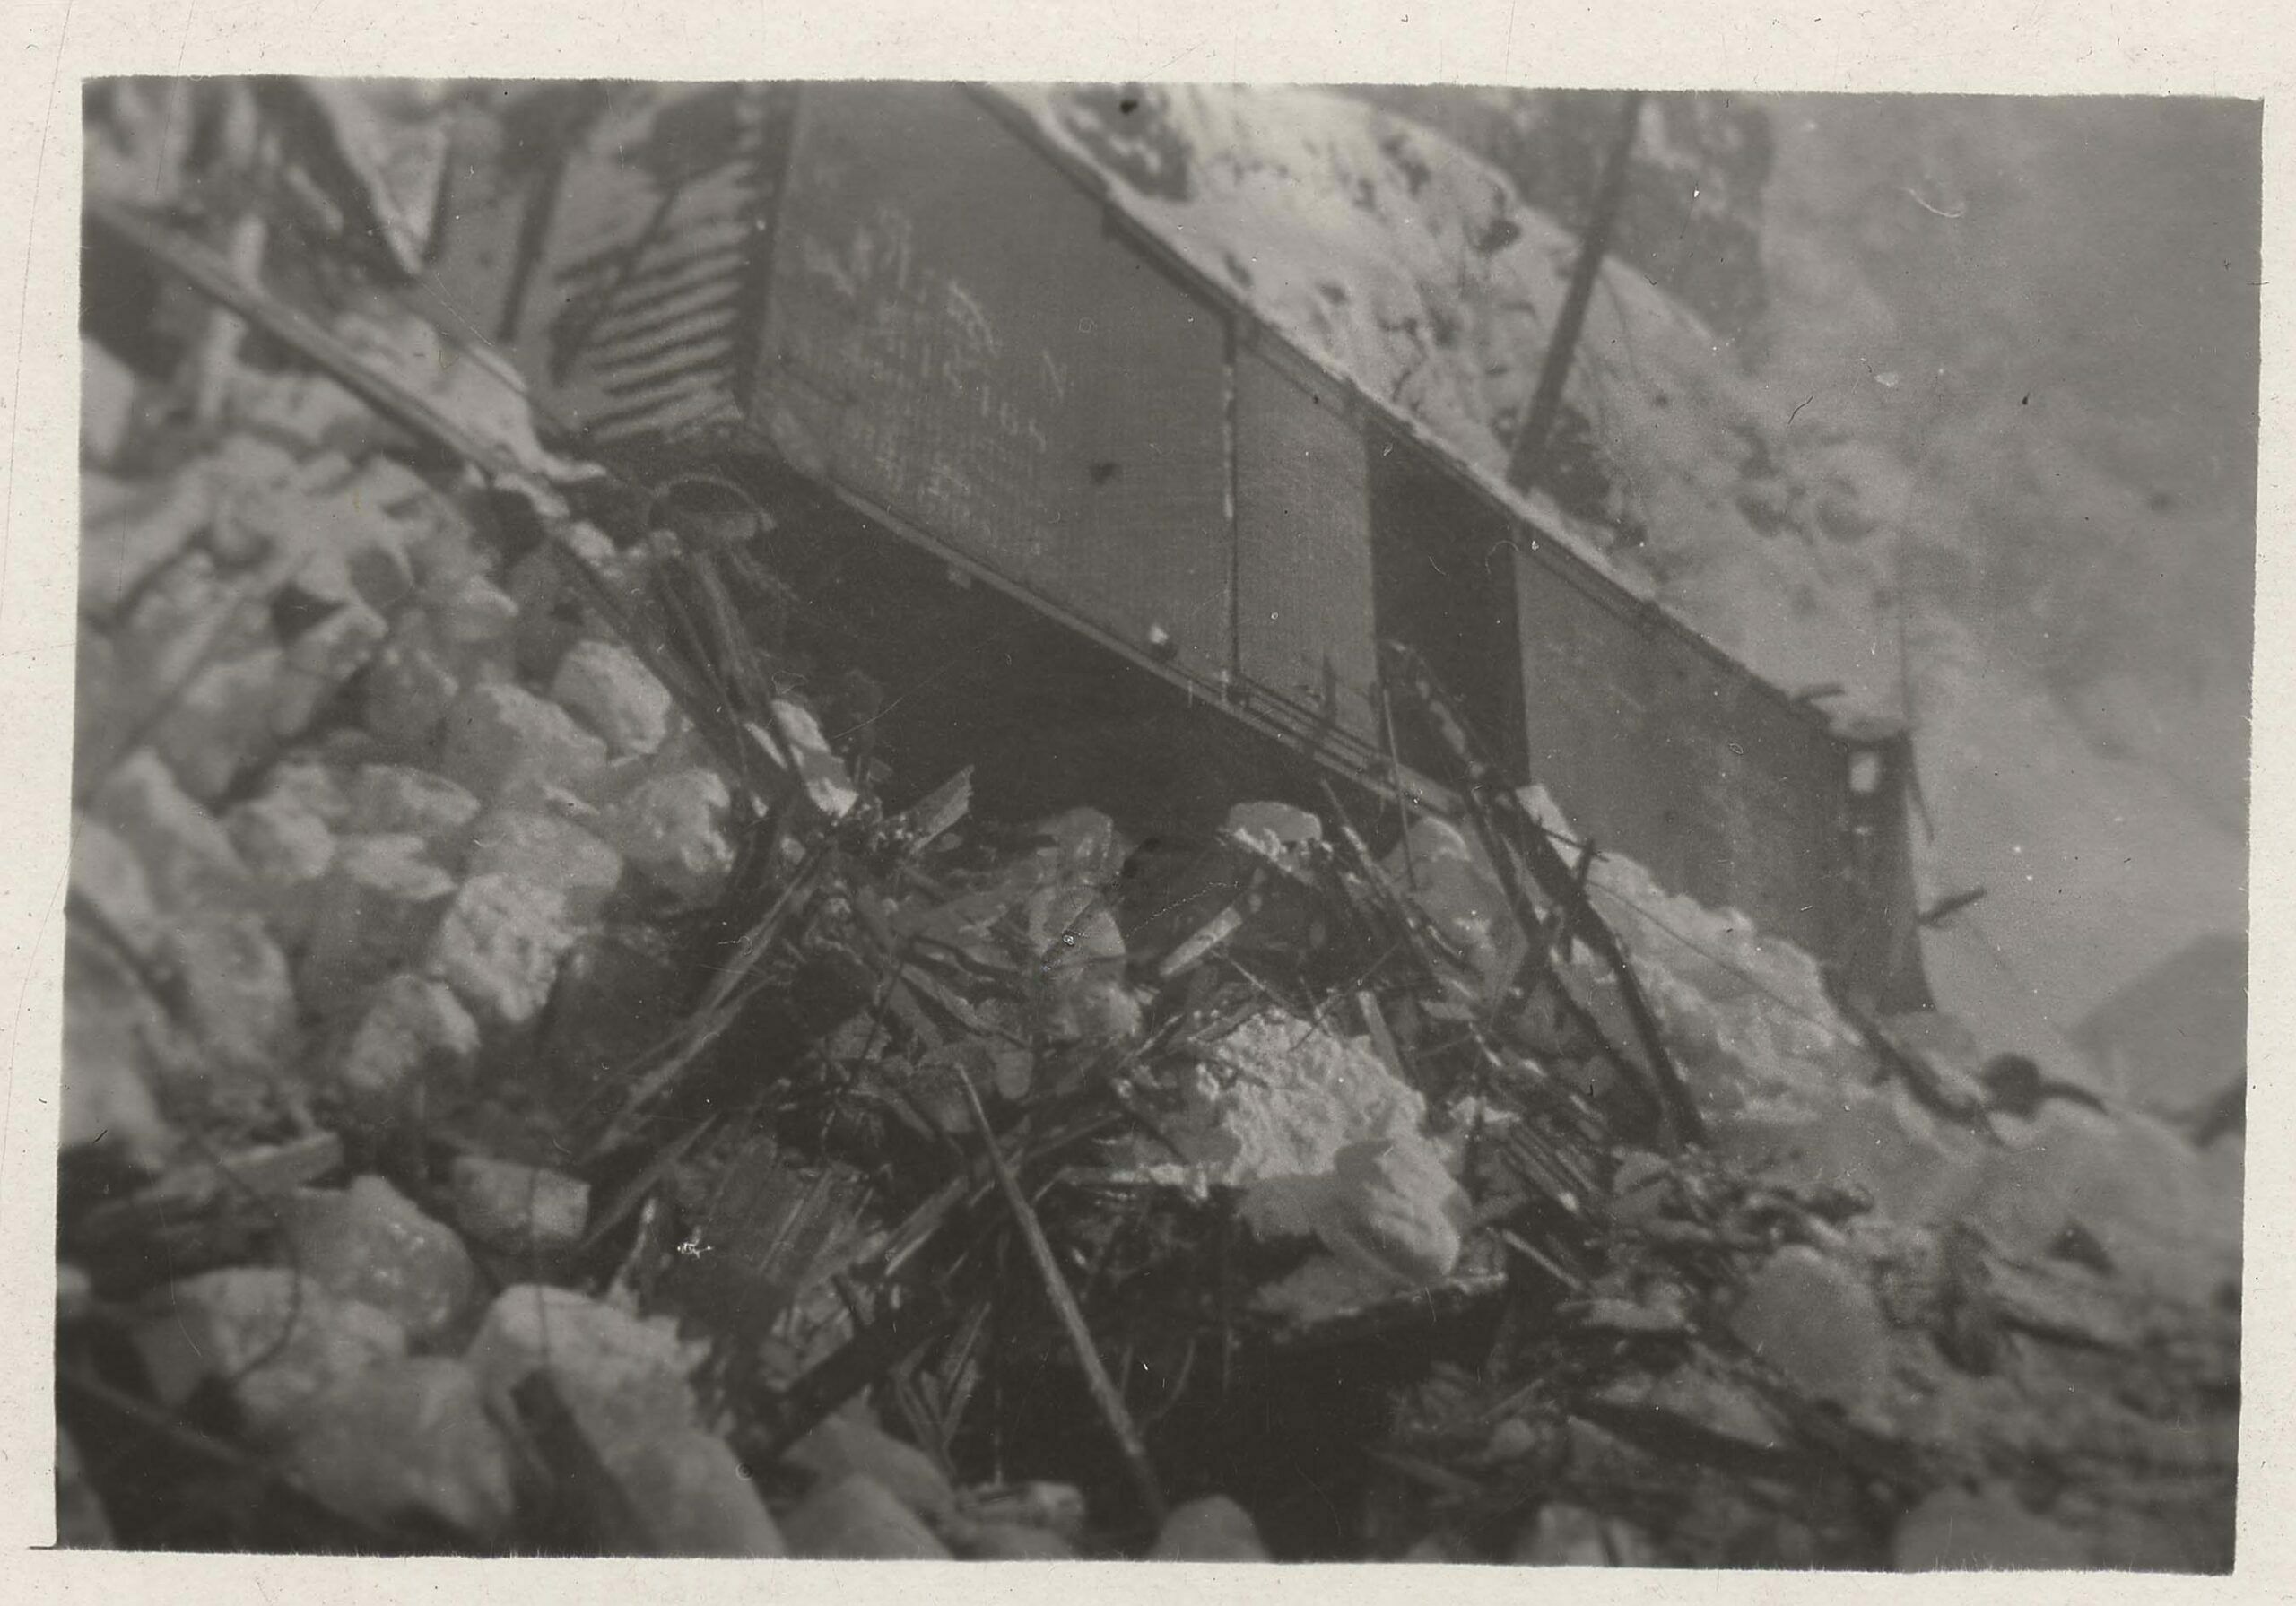 This train wreck occurred January 23, 1918 near Pando, Colorado. The engineer, Fred C. Graham, and the brakeman, Roy Foster Leininger, were killed. Leininger’s body was buried under tons of wreckage and crushed beyond recognition.  (3)